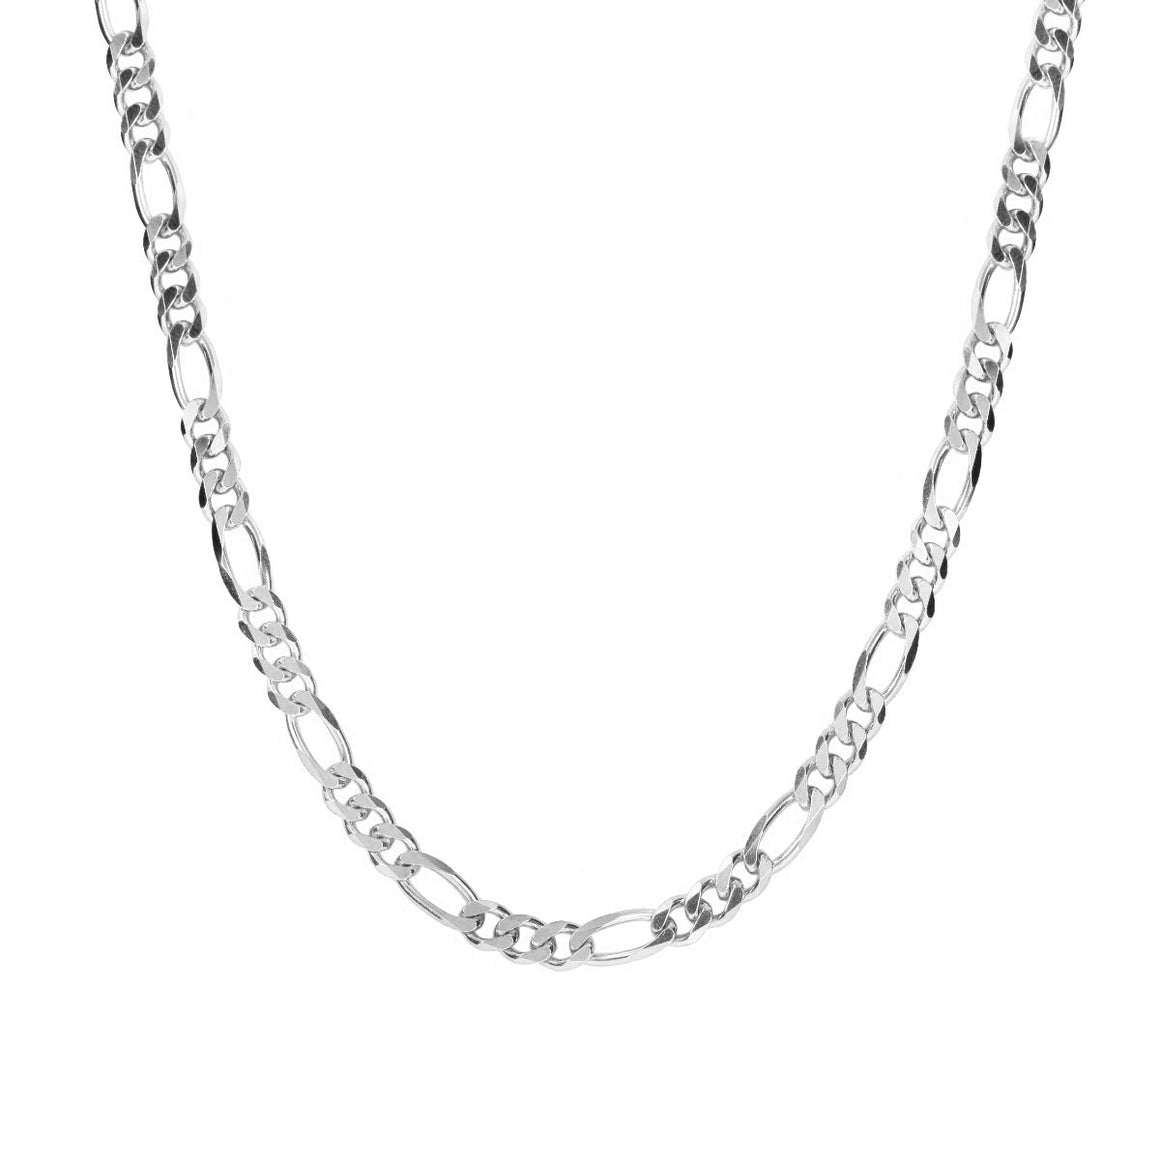 54 FLORAL 8mm FIGARO NECKLACE CHAIN - SILVER